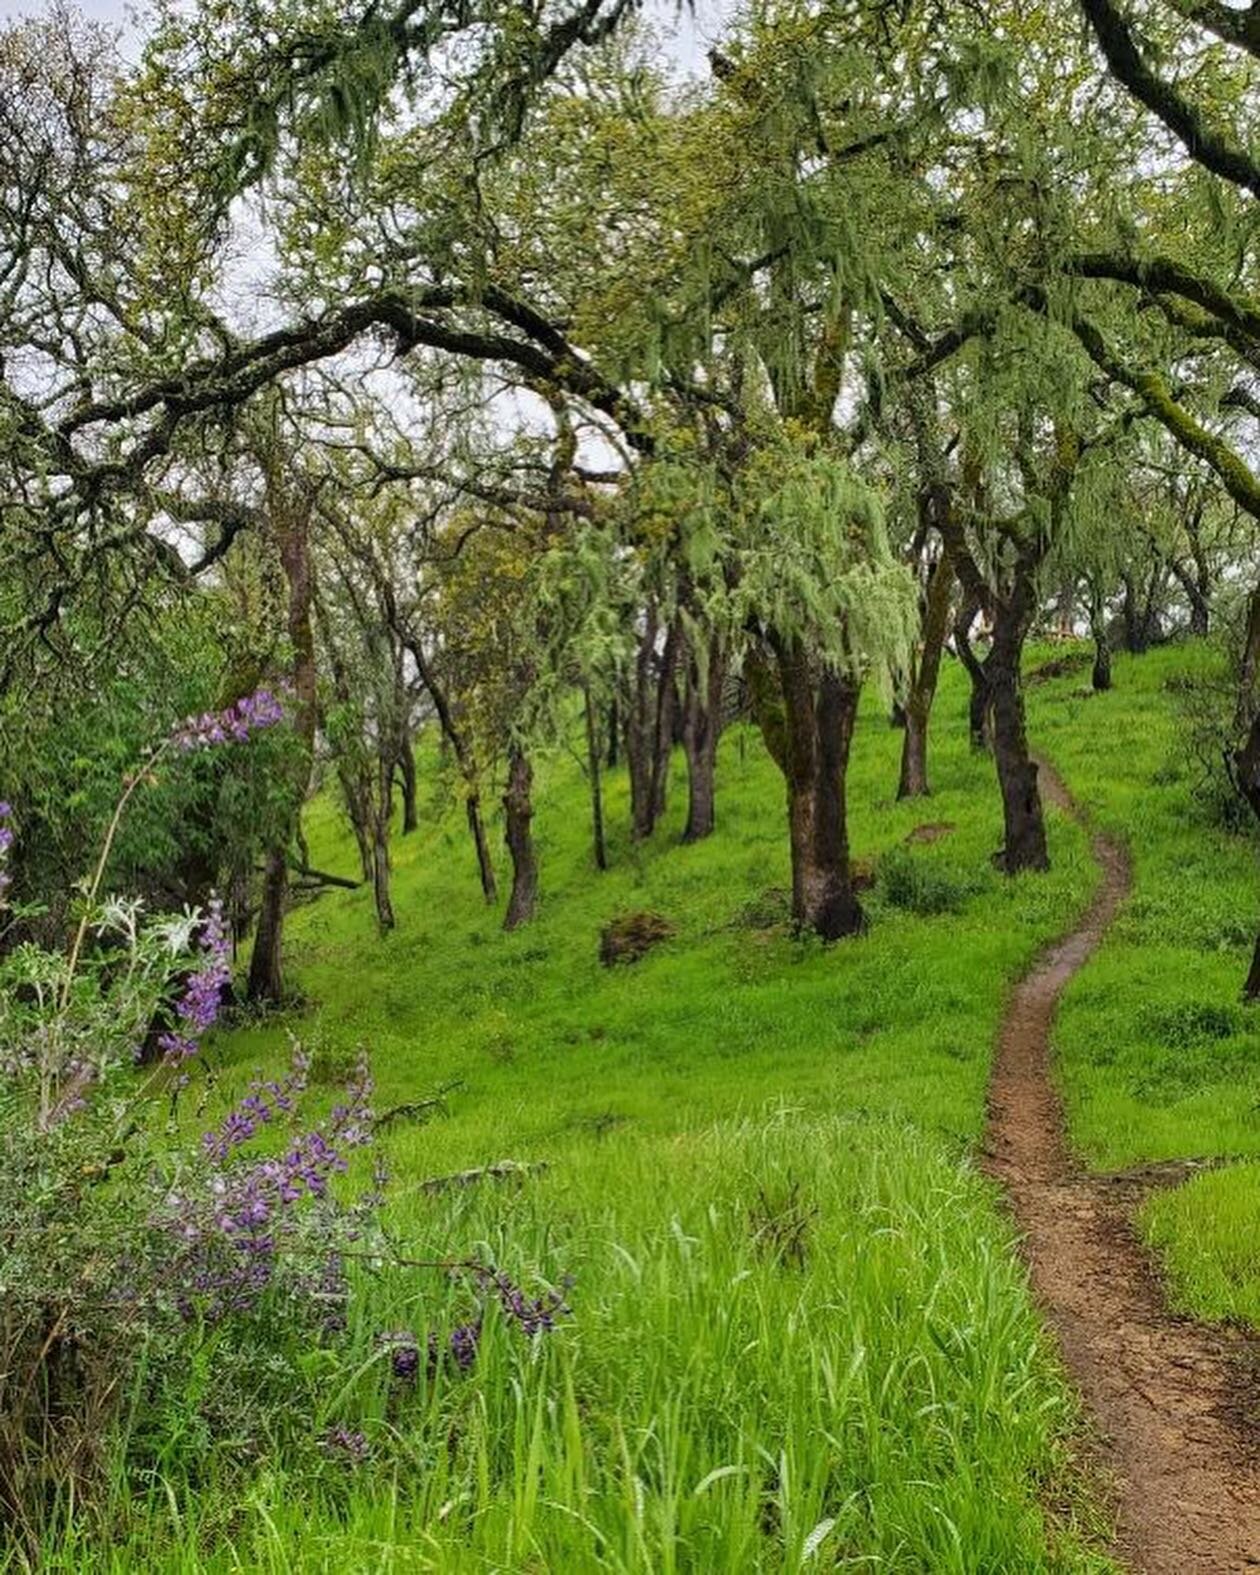 Our insider @werdrebmocam has been out on the trails again!  This time hitting the Oat Hill Mine Trail in @visitcalistoga !  Here&rsquo;s his report!
&ldquo;Rainy, grey days mean the colors pop out that much more! There are some really cool single tr